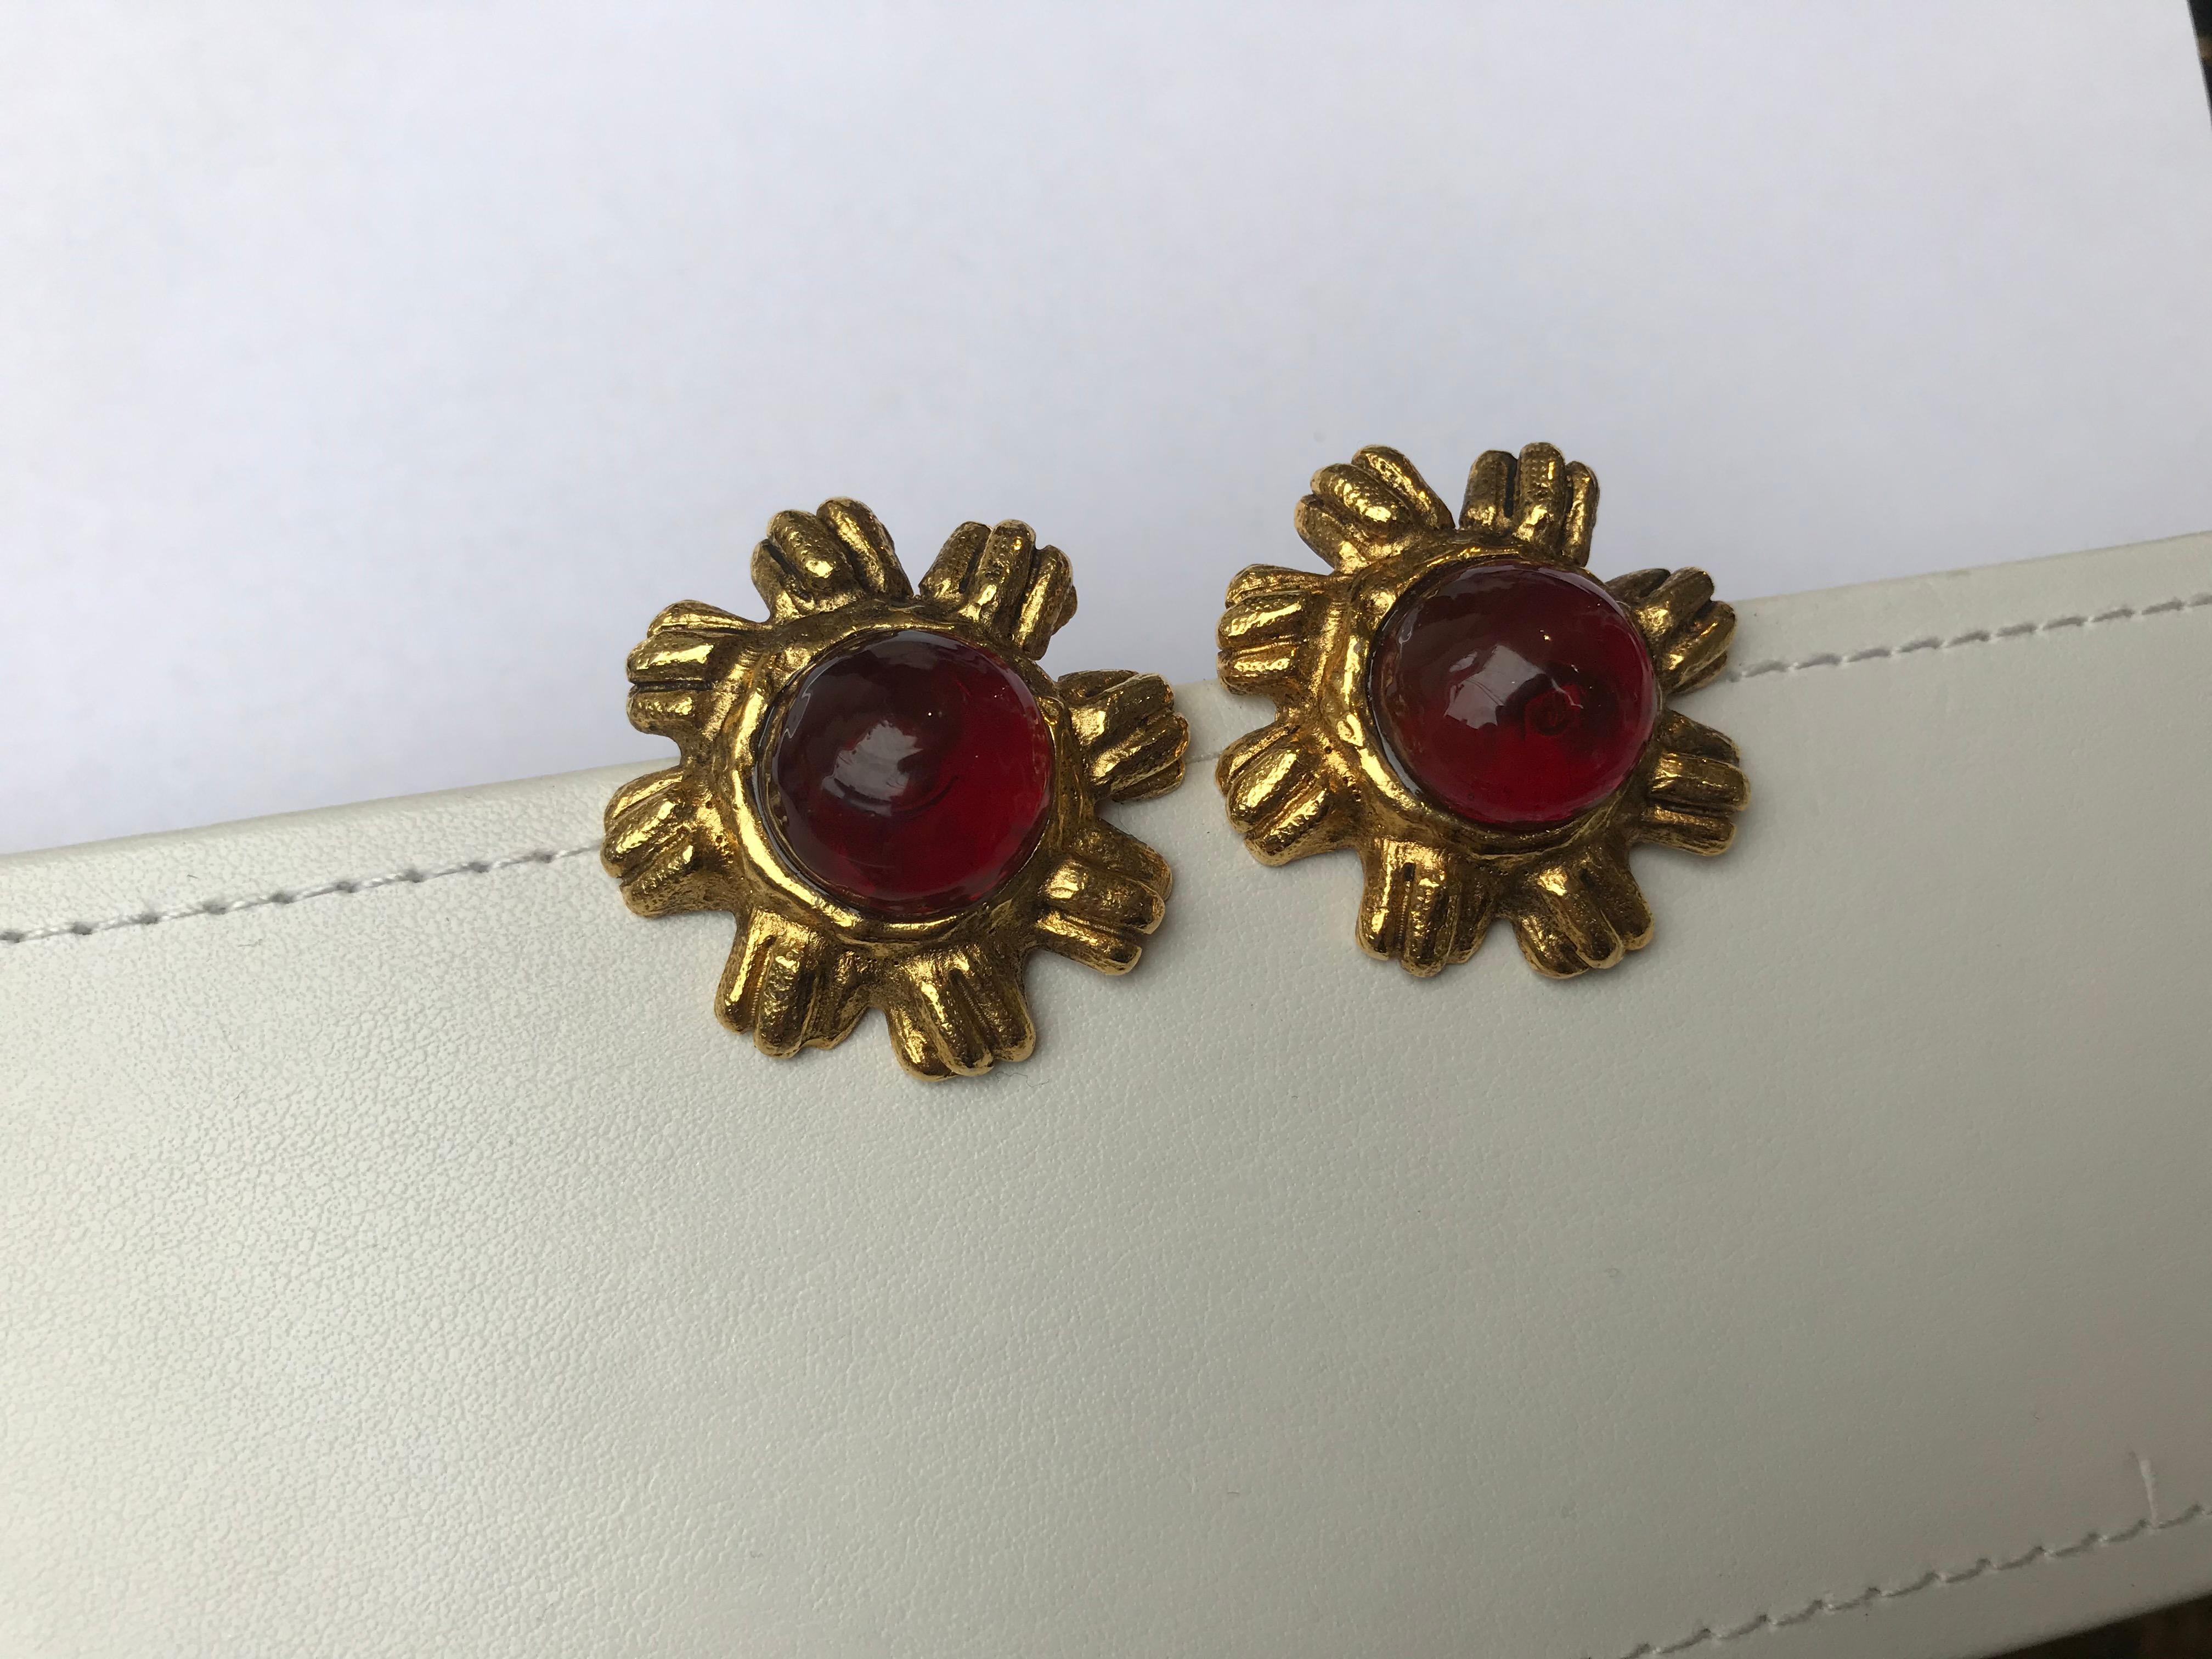 Gold-tone metal. Red gemstone at center. Clip-on closures.